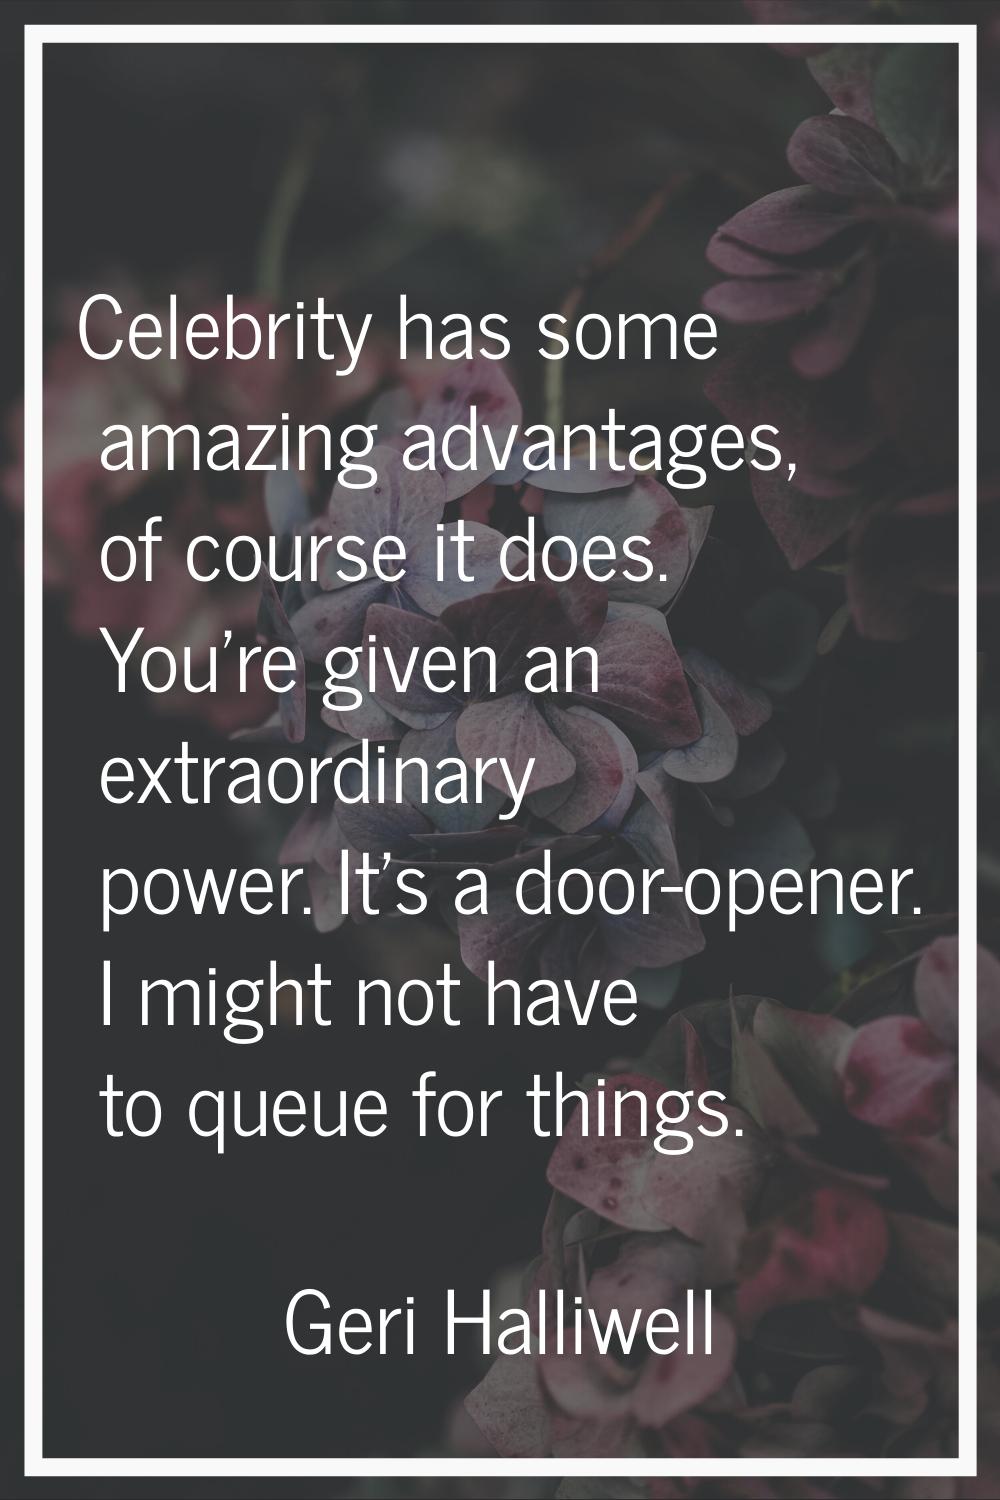 Celebrity has some amazing advantages, of course it does. You're given an extraordinary power. It's